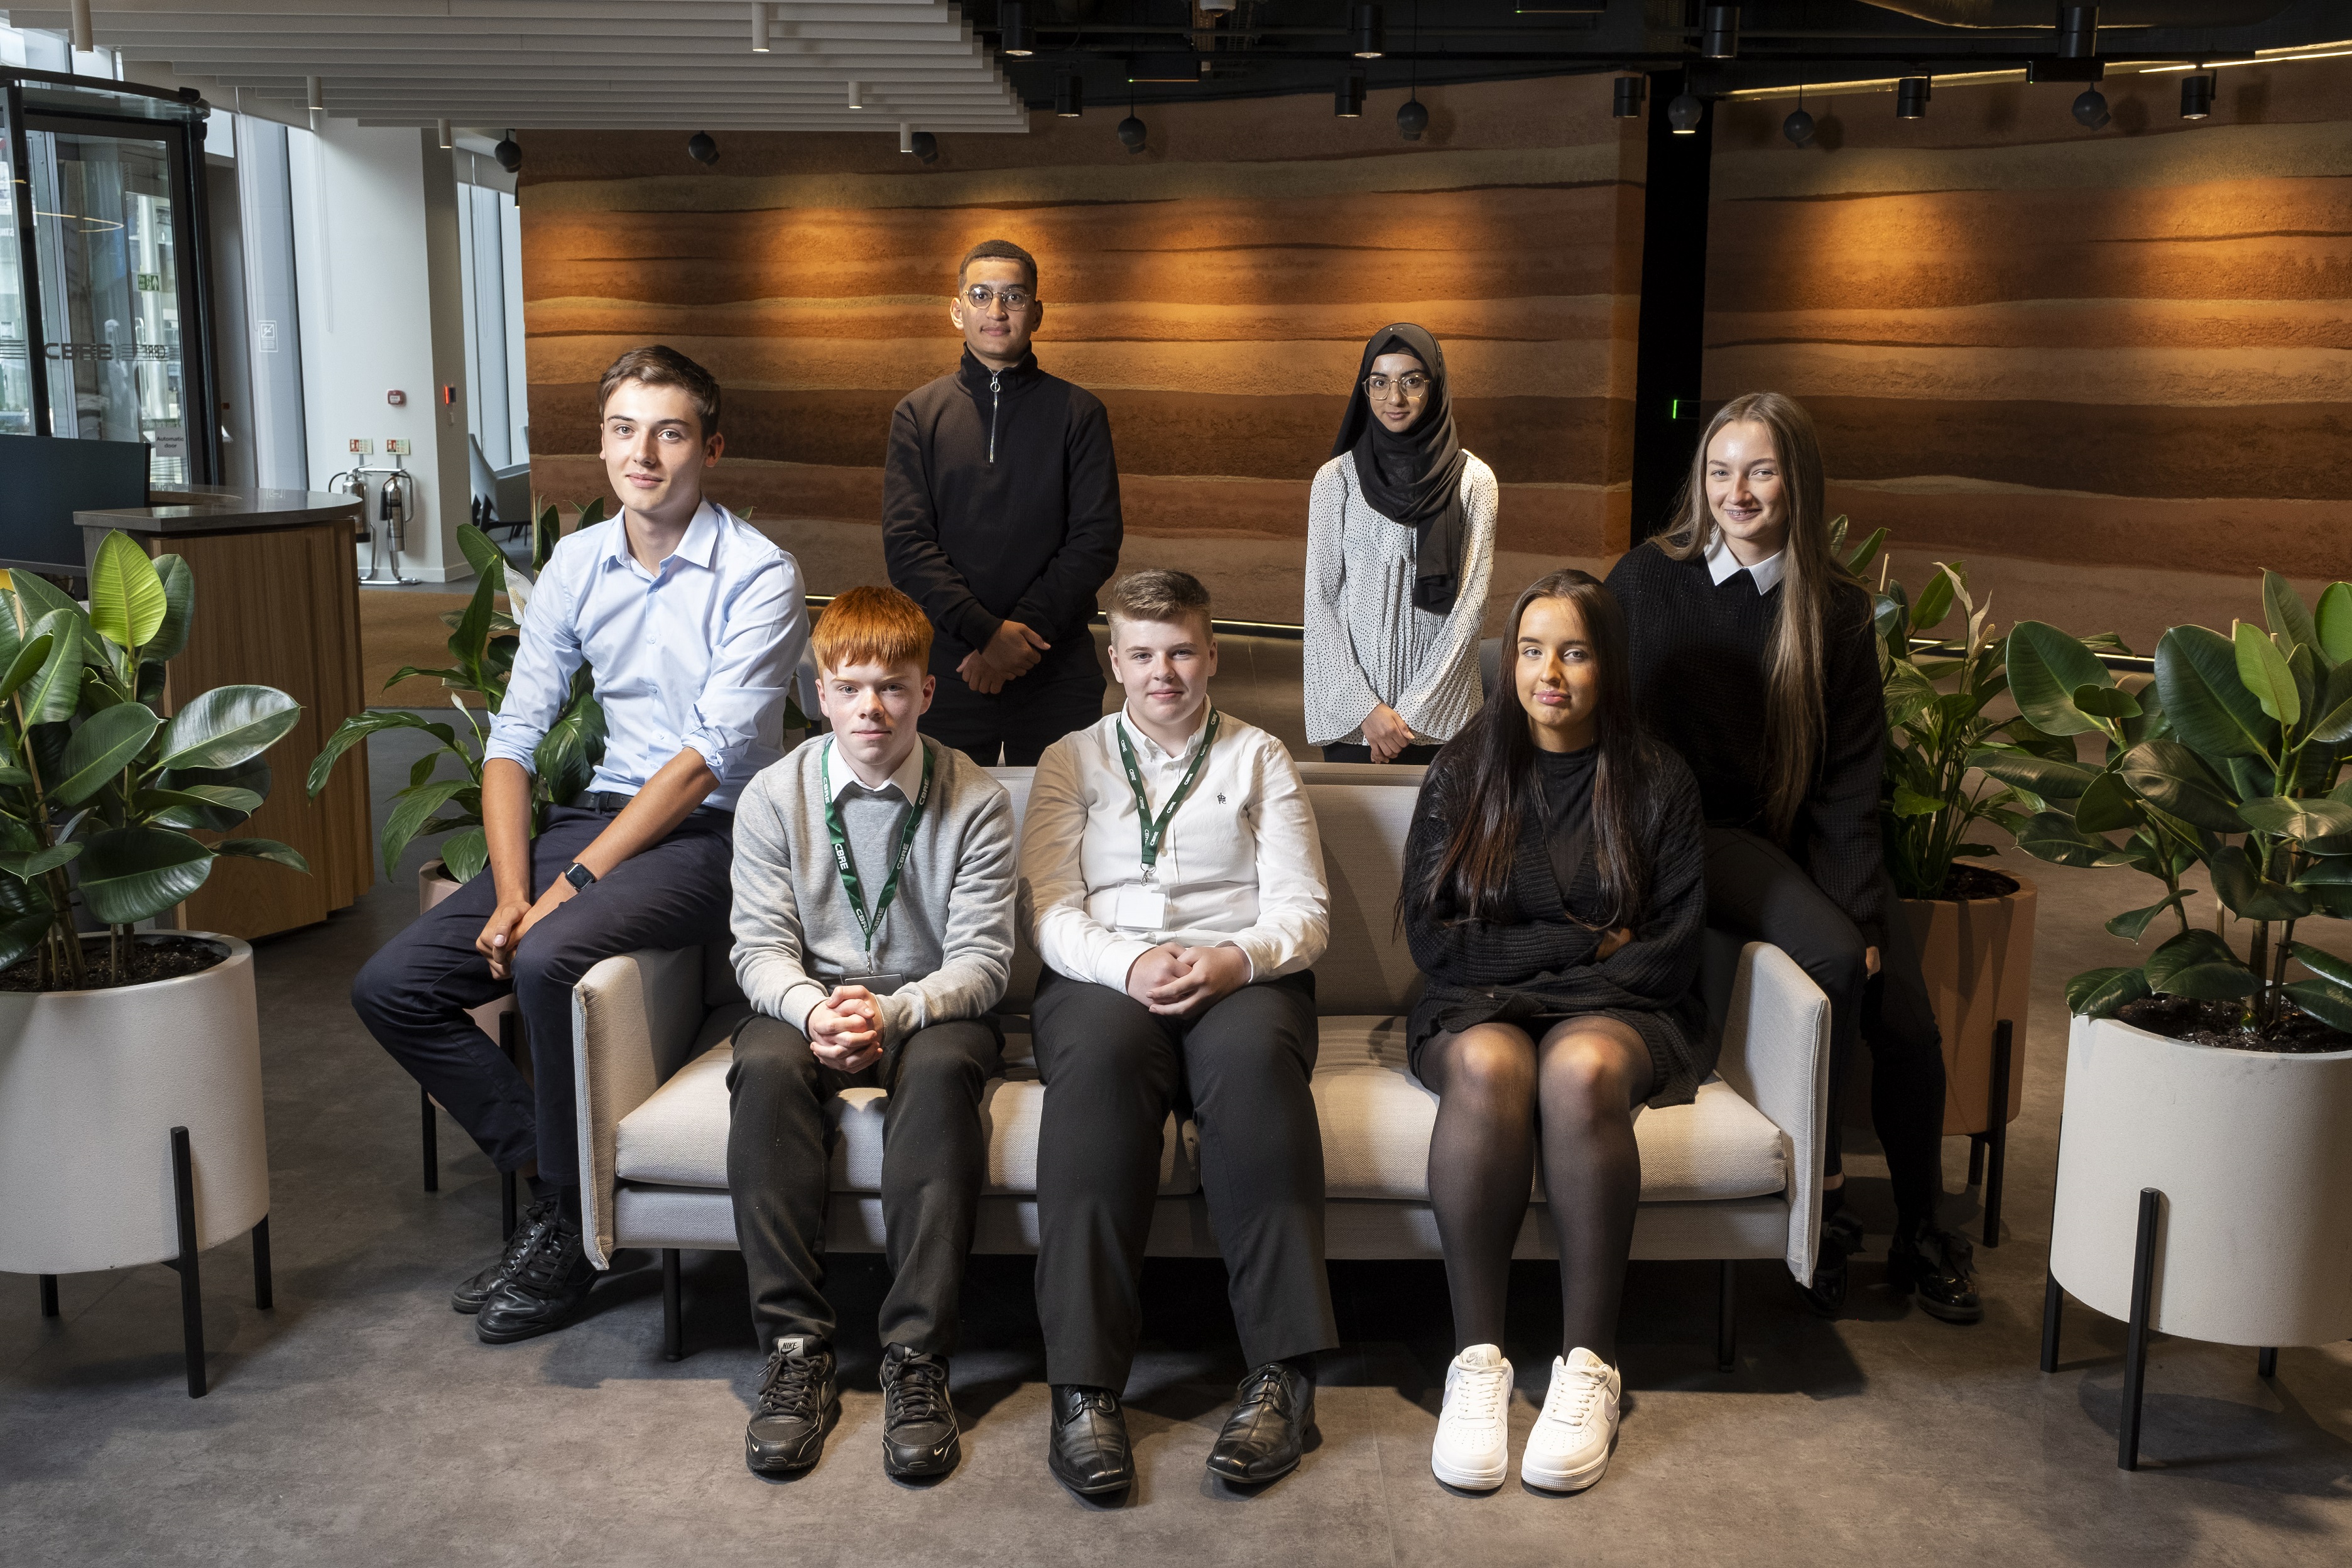 CBRE provides ‘Career Ready’ partnership for young people in Scotland